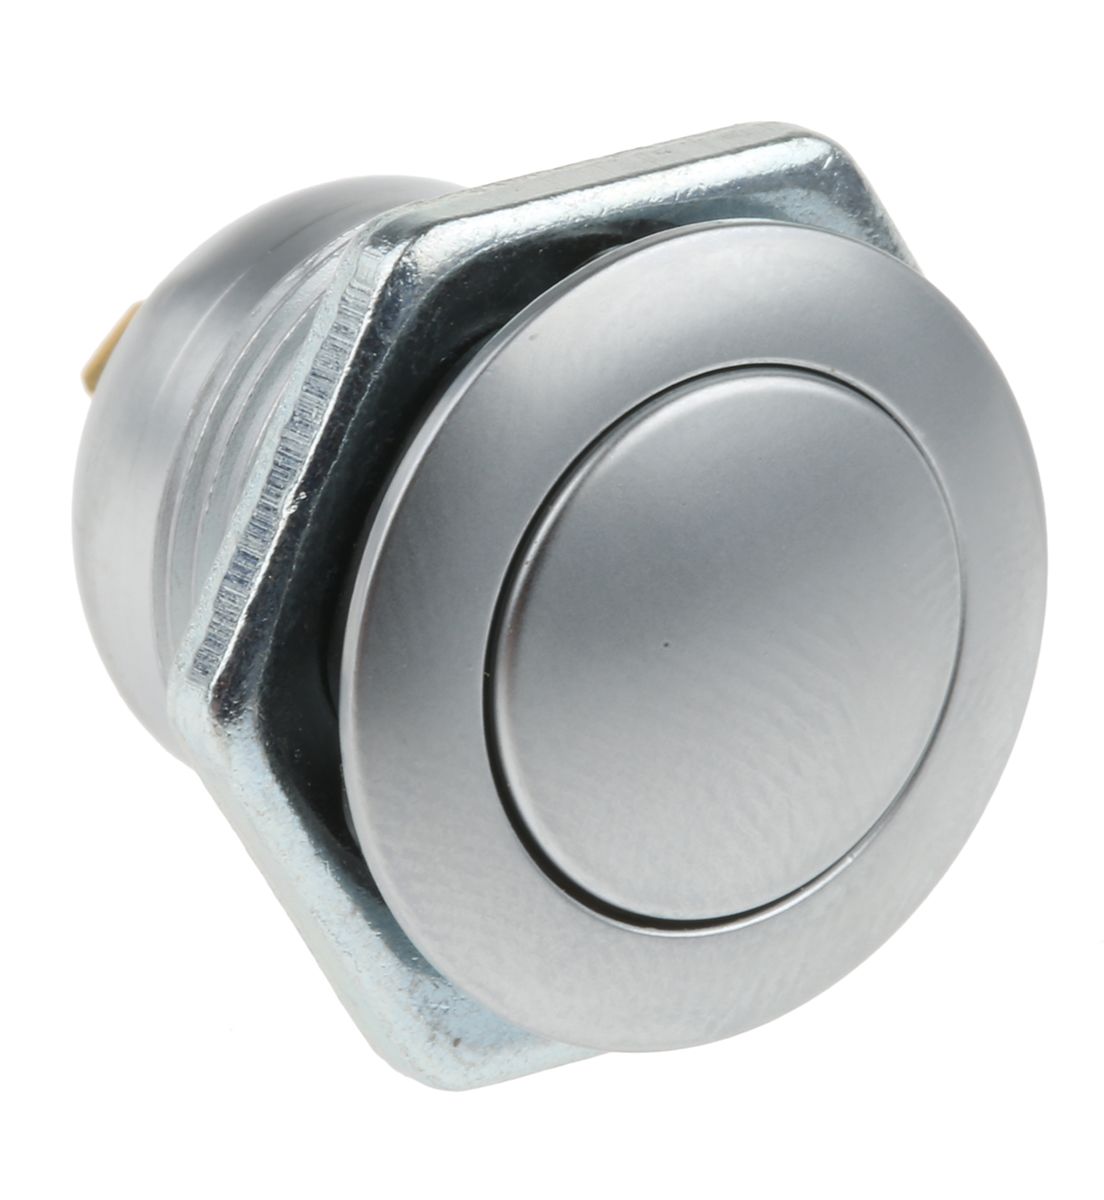 ITW Switches 57M Series Latching Miniature Push Button Switch, Panel Mount, SPST, 16.1mm Cutout, Clear LED, 48V dc, IP67